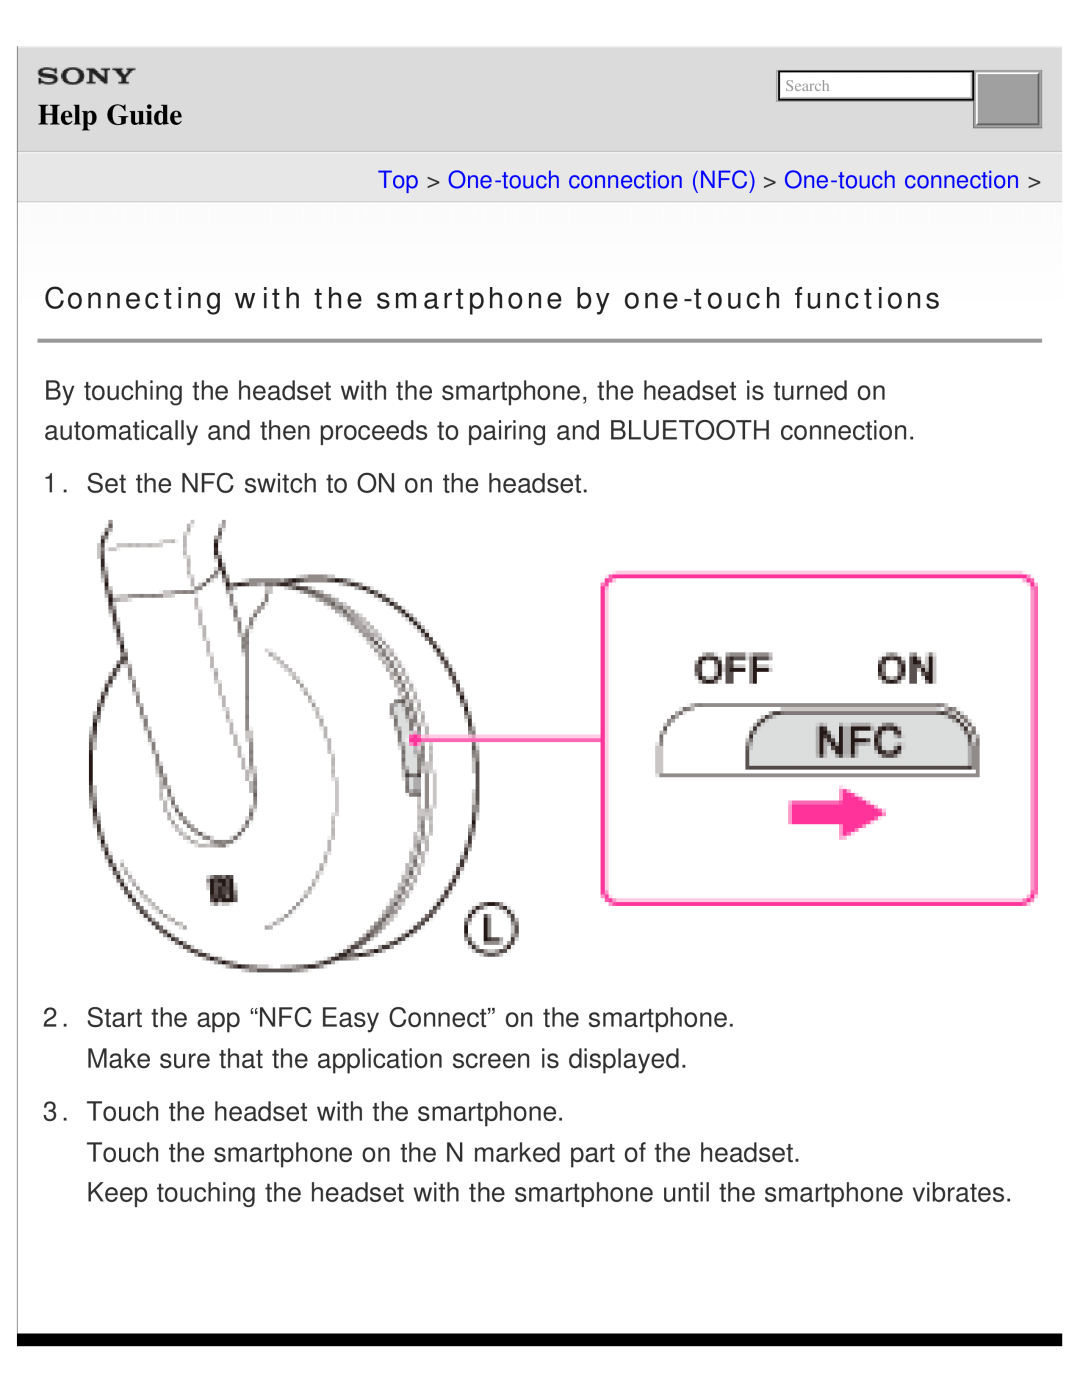 Sony DR-BTN200 manual Help Guide, Set the NFC switch to ON on the headset 